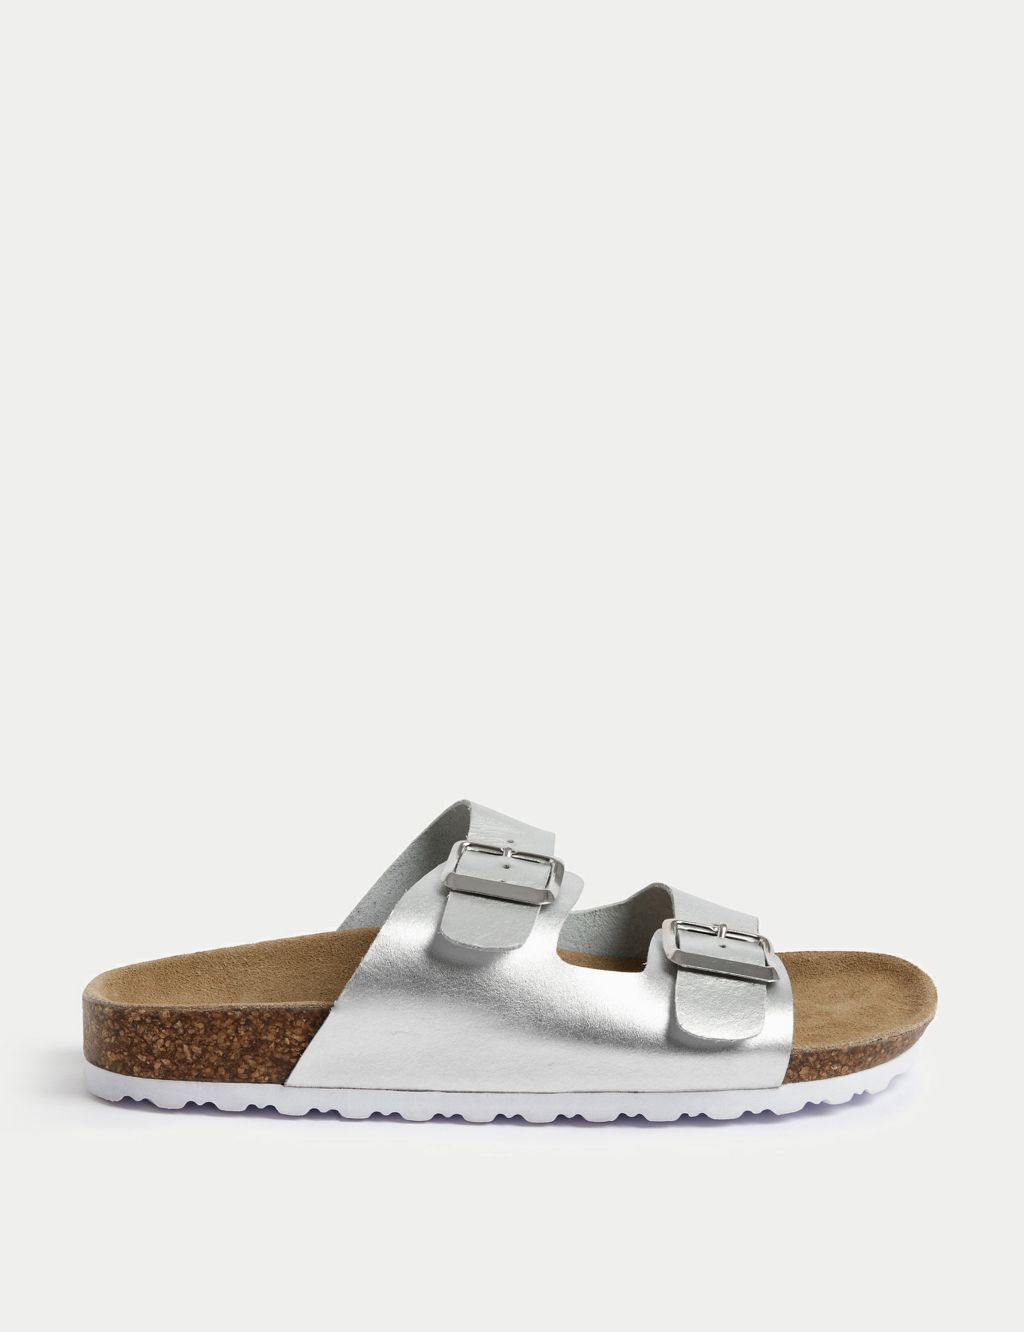 Leather Two Strap Sandals image 1